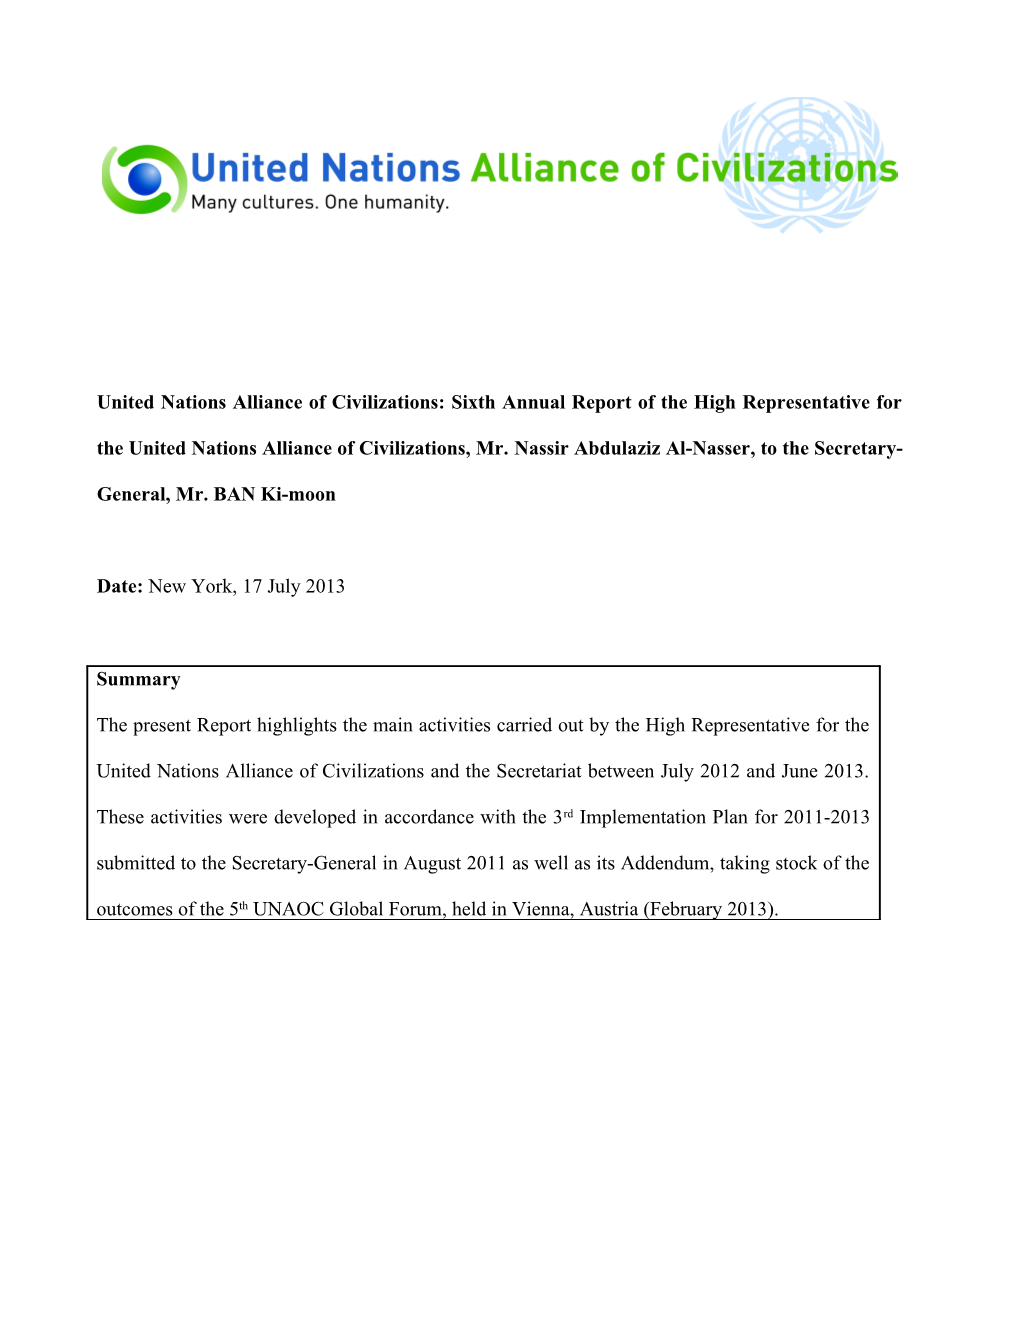 United Nations Alliance of Civilizations: Sixth Annual Report of the High Representative